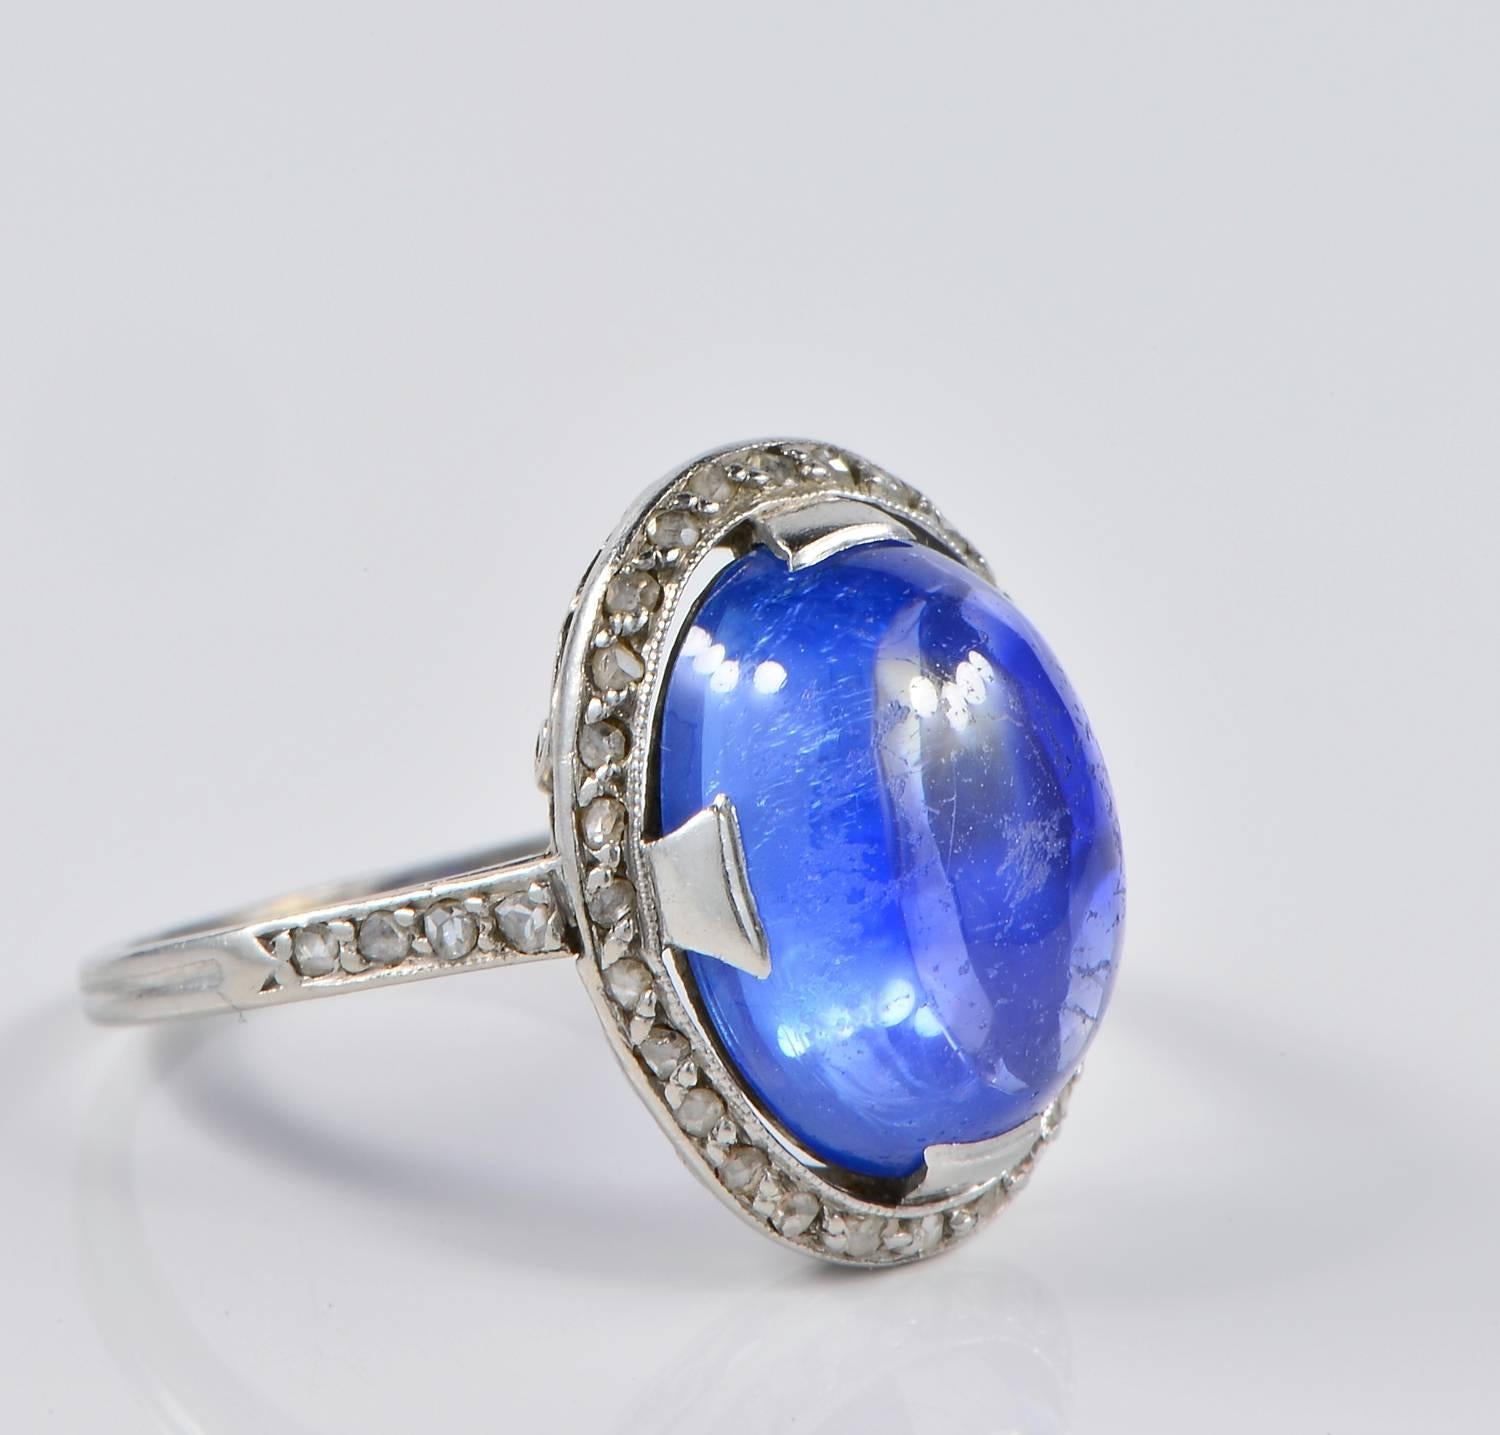 A charming early Deco ring all crafted of Platinum in a delightful design.
Centering a large Natural Ceylon Sapphire cabochon oval cut - estimate 10.0 Ct - measuring  12.70 mm. x 10.20 mm.
Complemented by tiny old rose cut Diamonds adding character